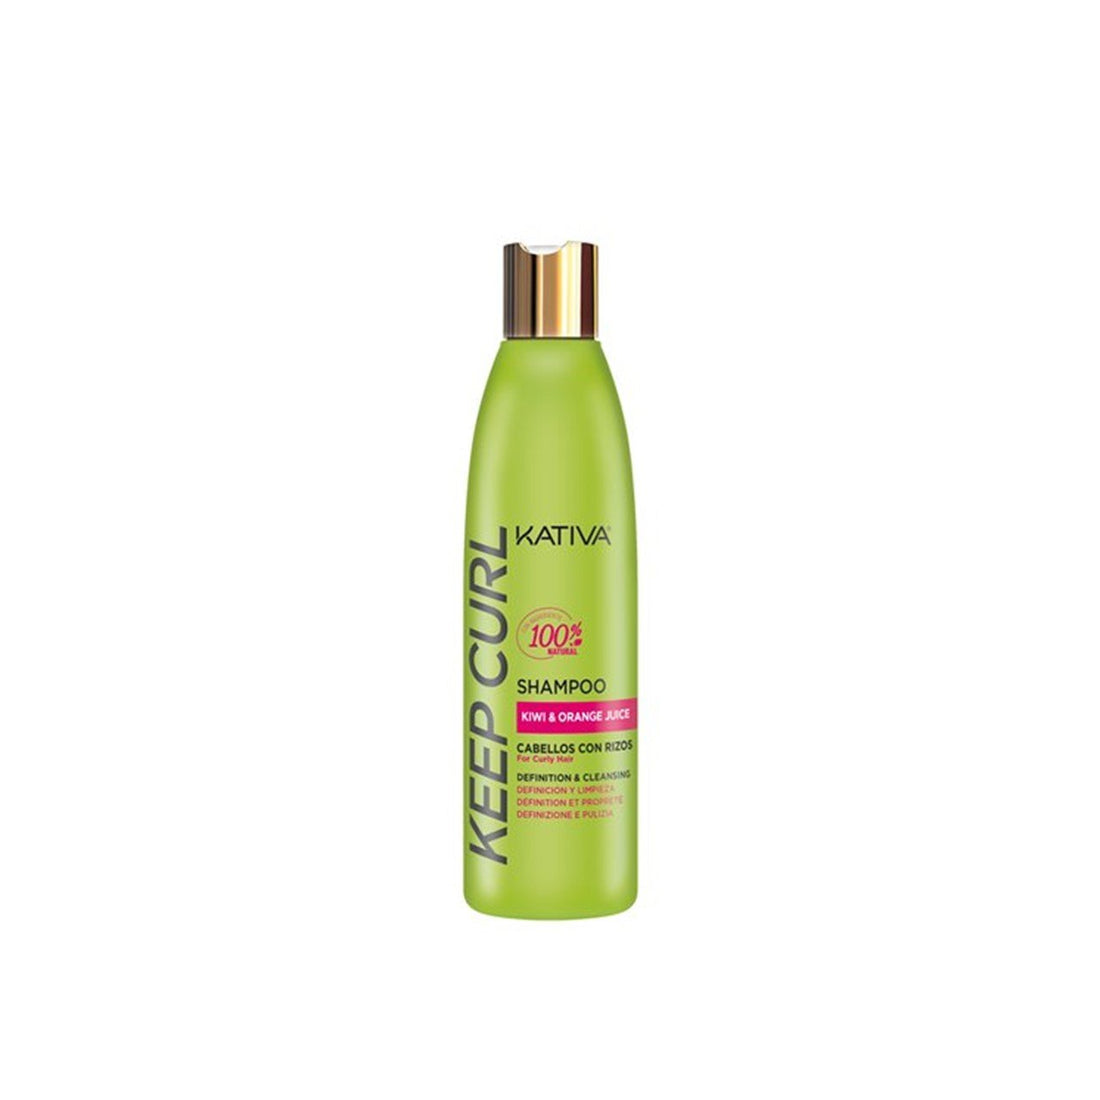 Kativa Keep Curl Definition &amp; Cleansing Shampoo 250ml